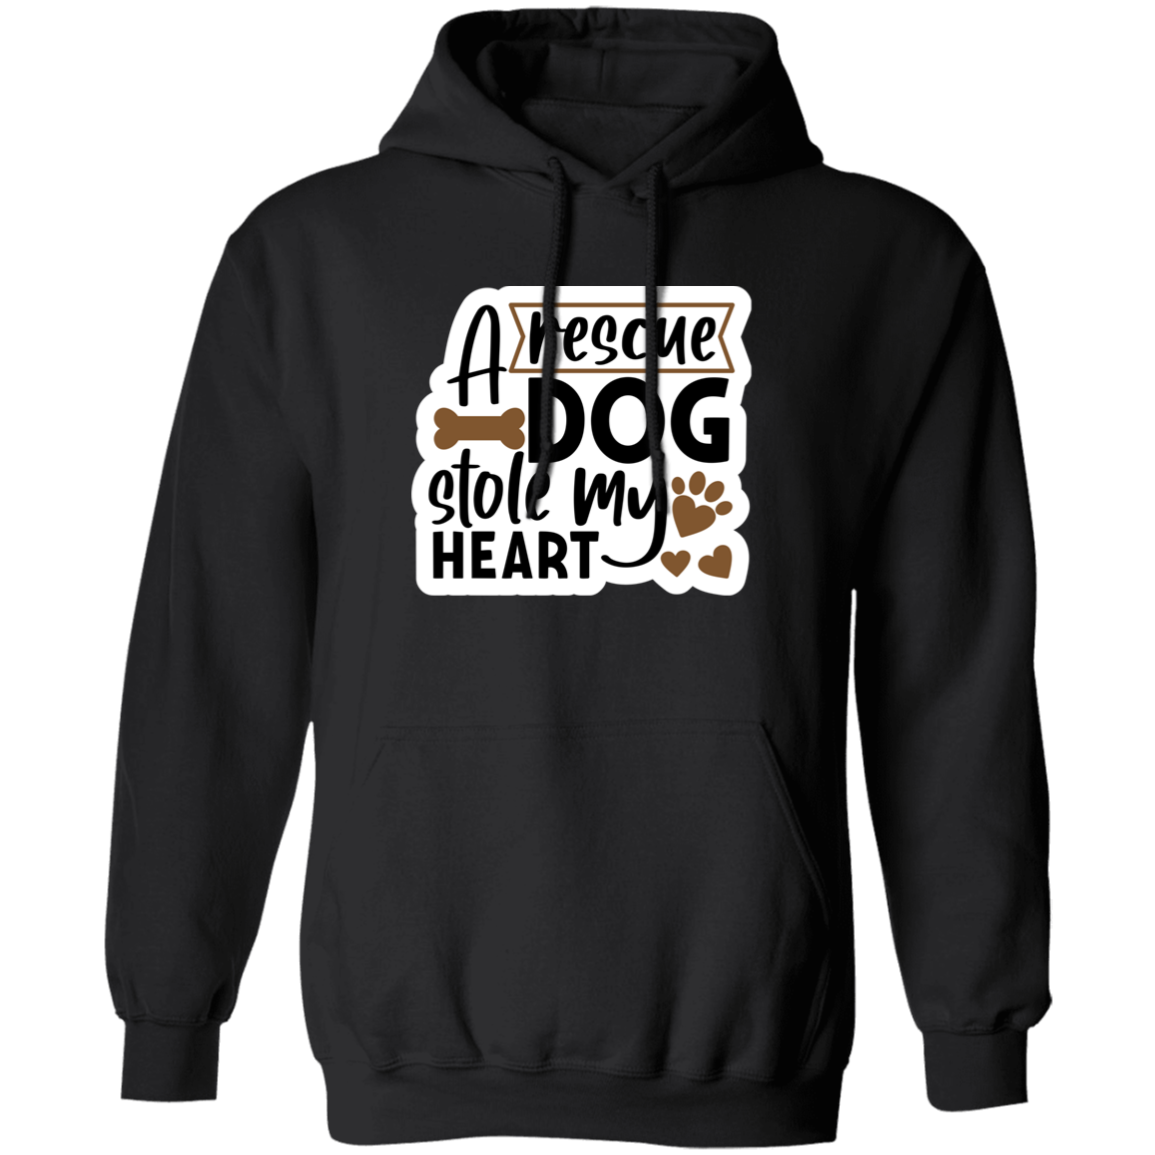 A Rescue Dog Stole My Heart Pullover Hoodie Hooded Sweatshirt